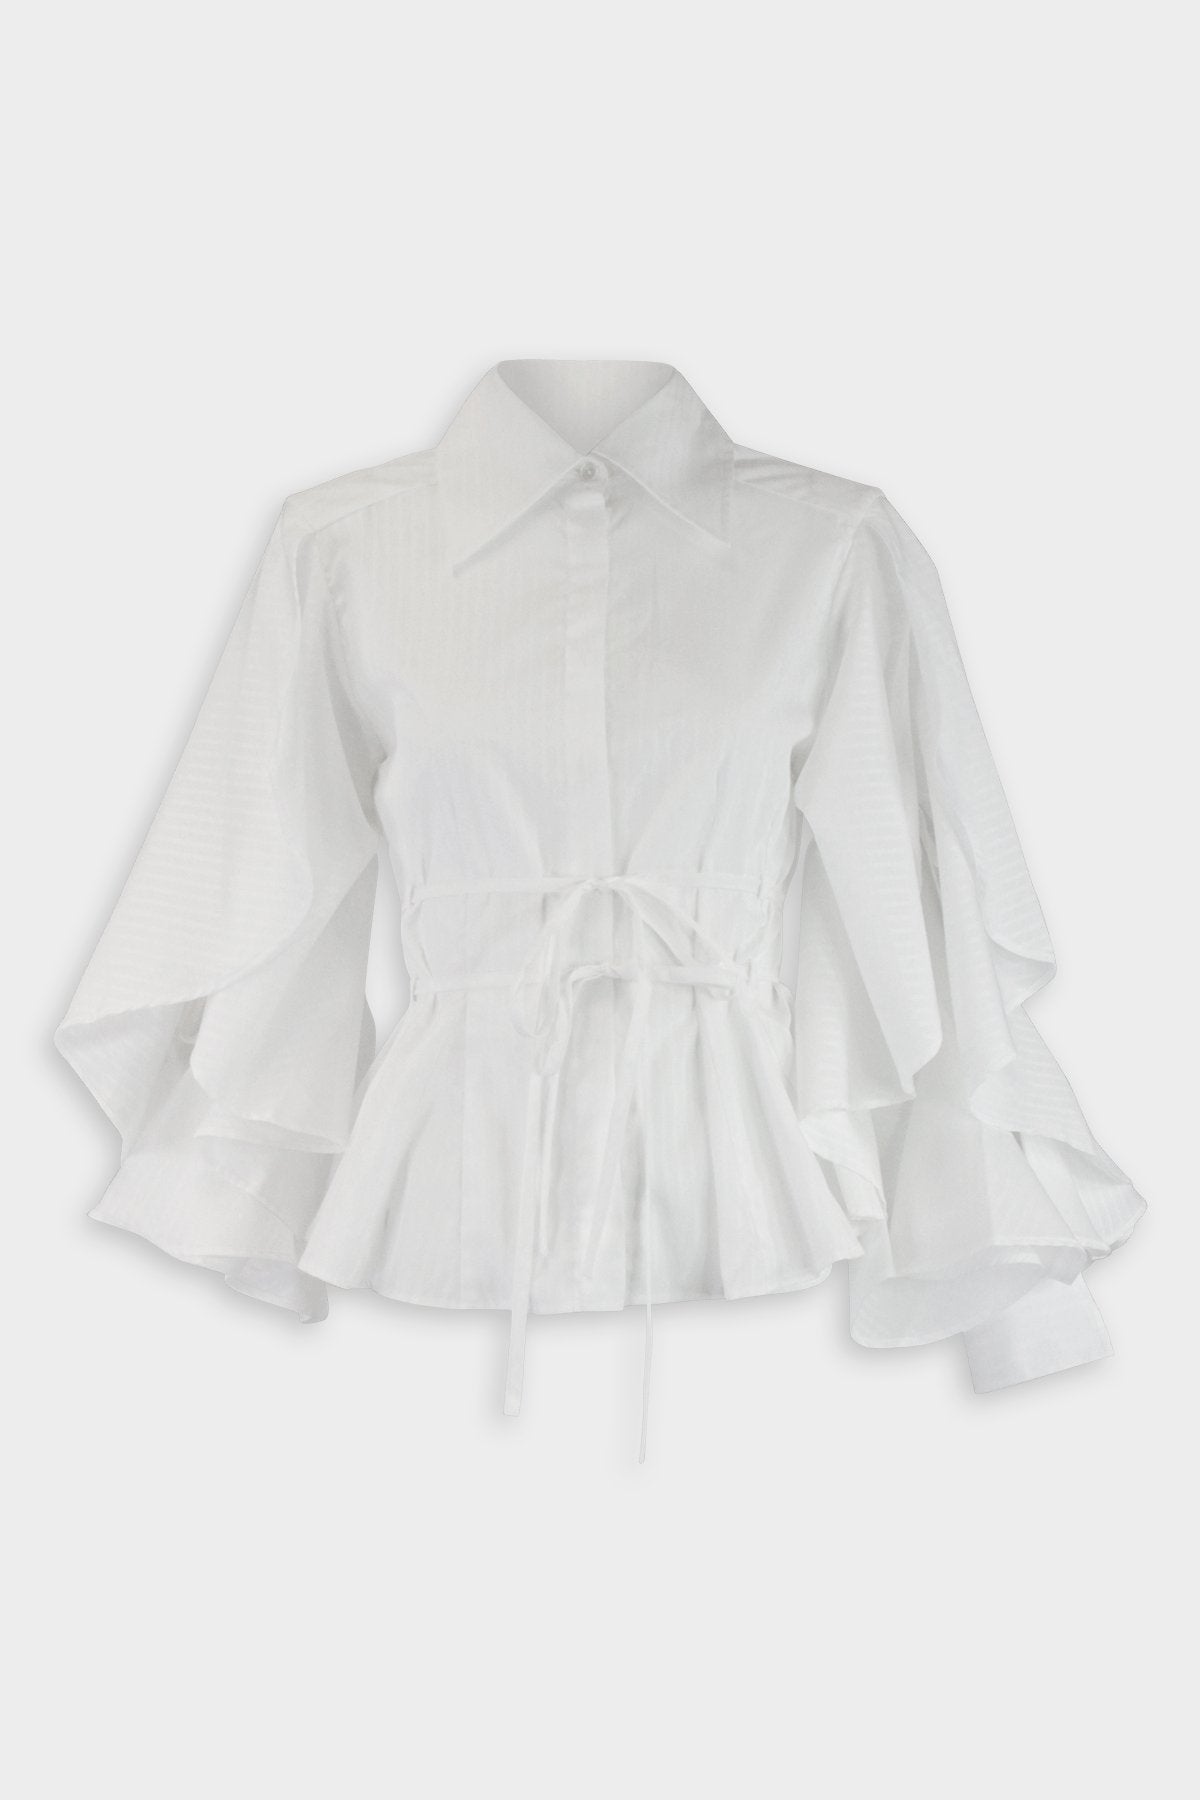 Lacerated Shirt in White Satin Stripe - shop-olivia.com